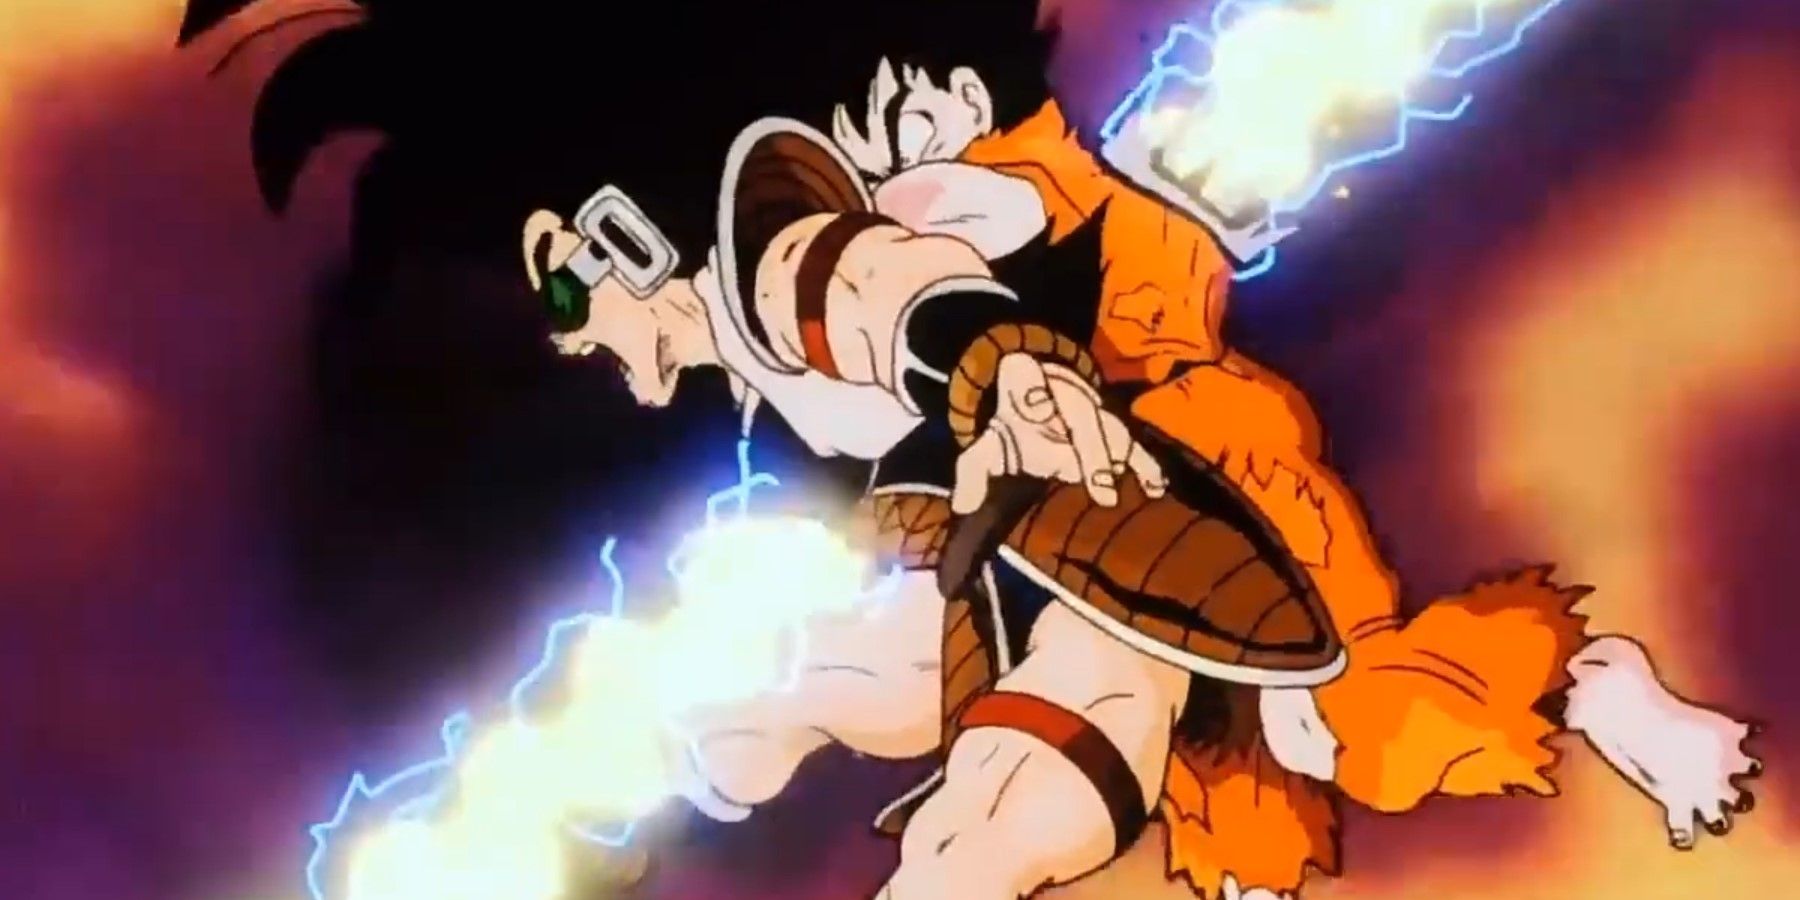 Goku and Raditz being hit by the Special Beam Cannon